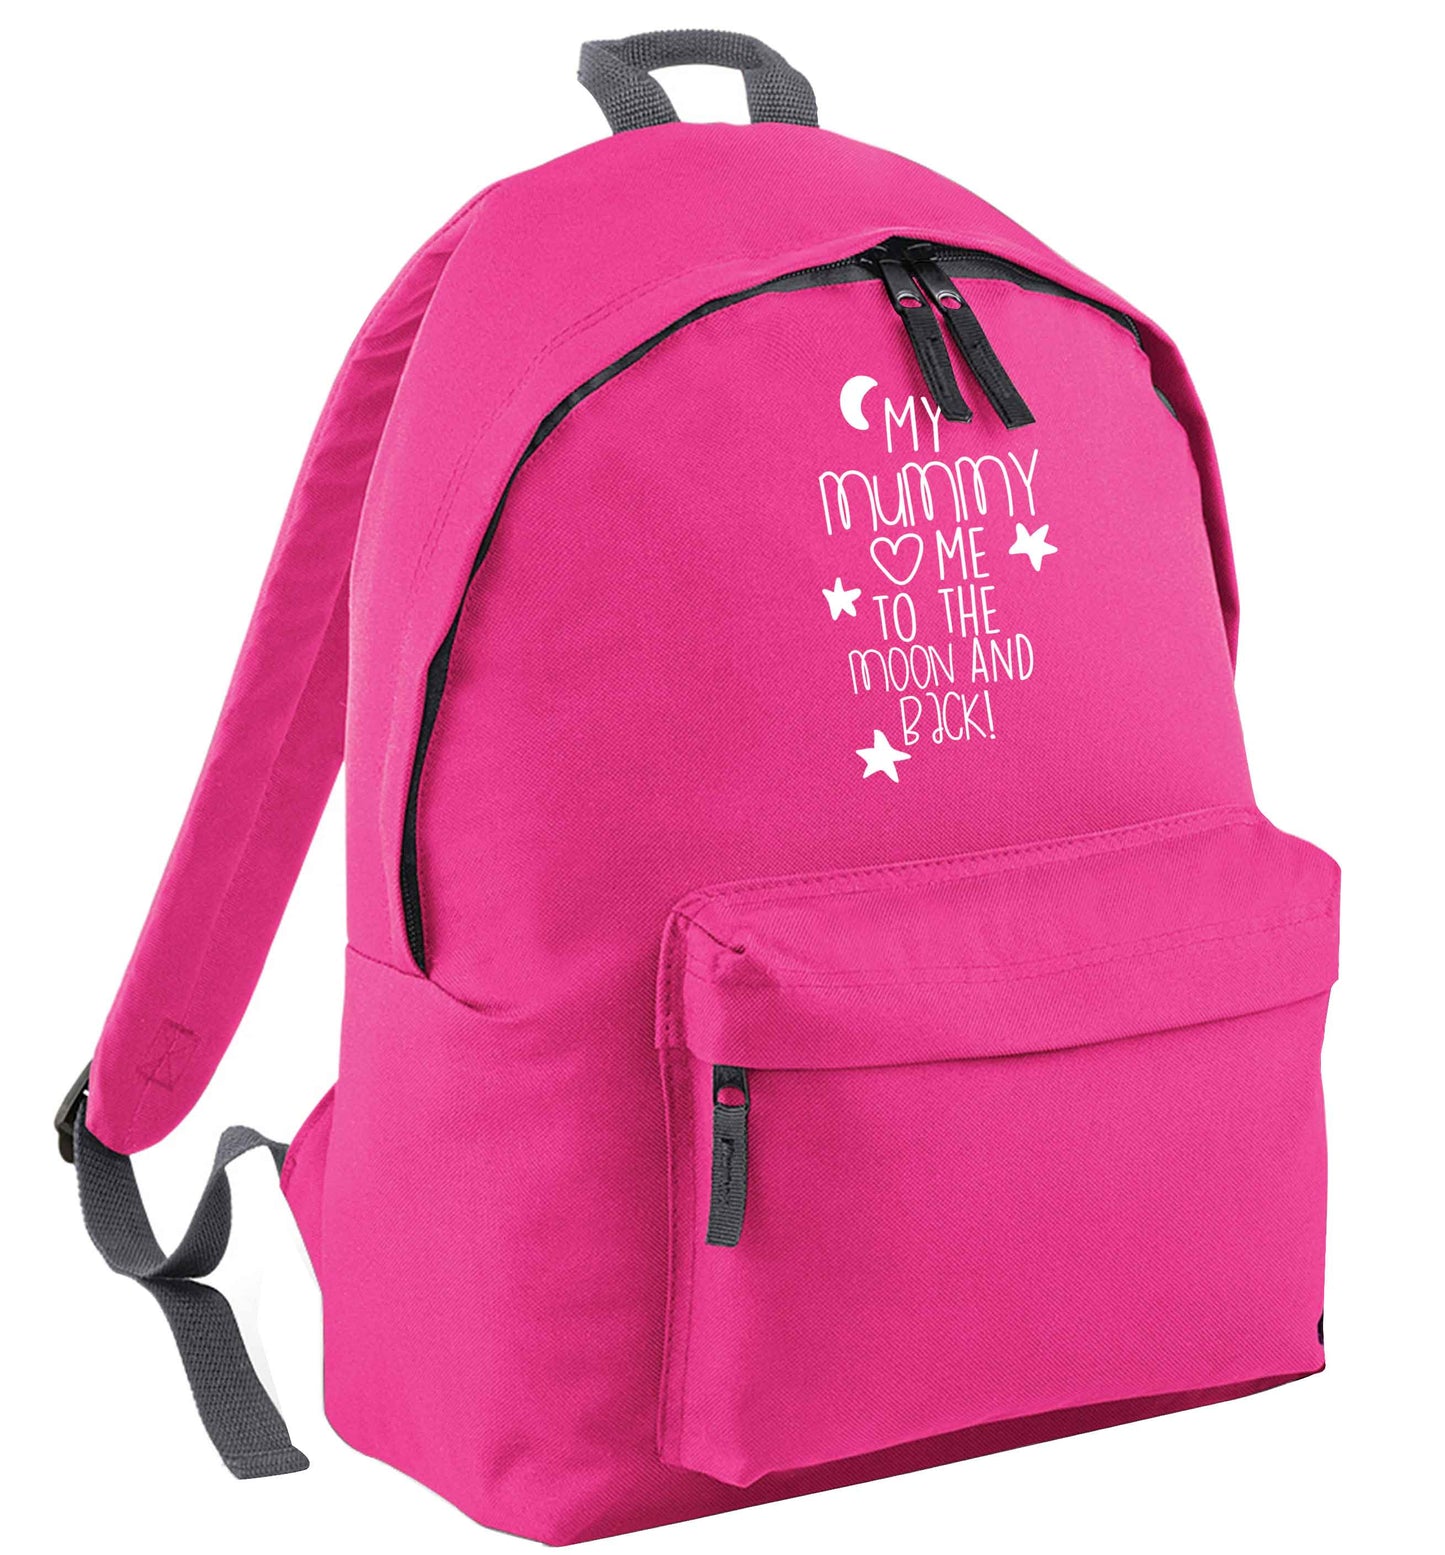 My mum loves me to the moon and back pink childrens backpack